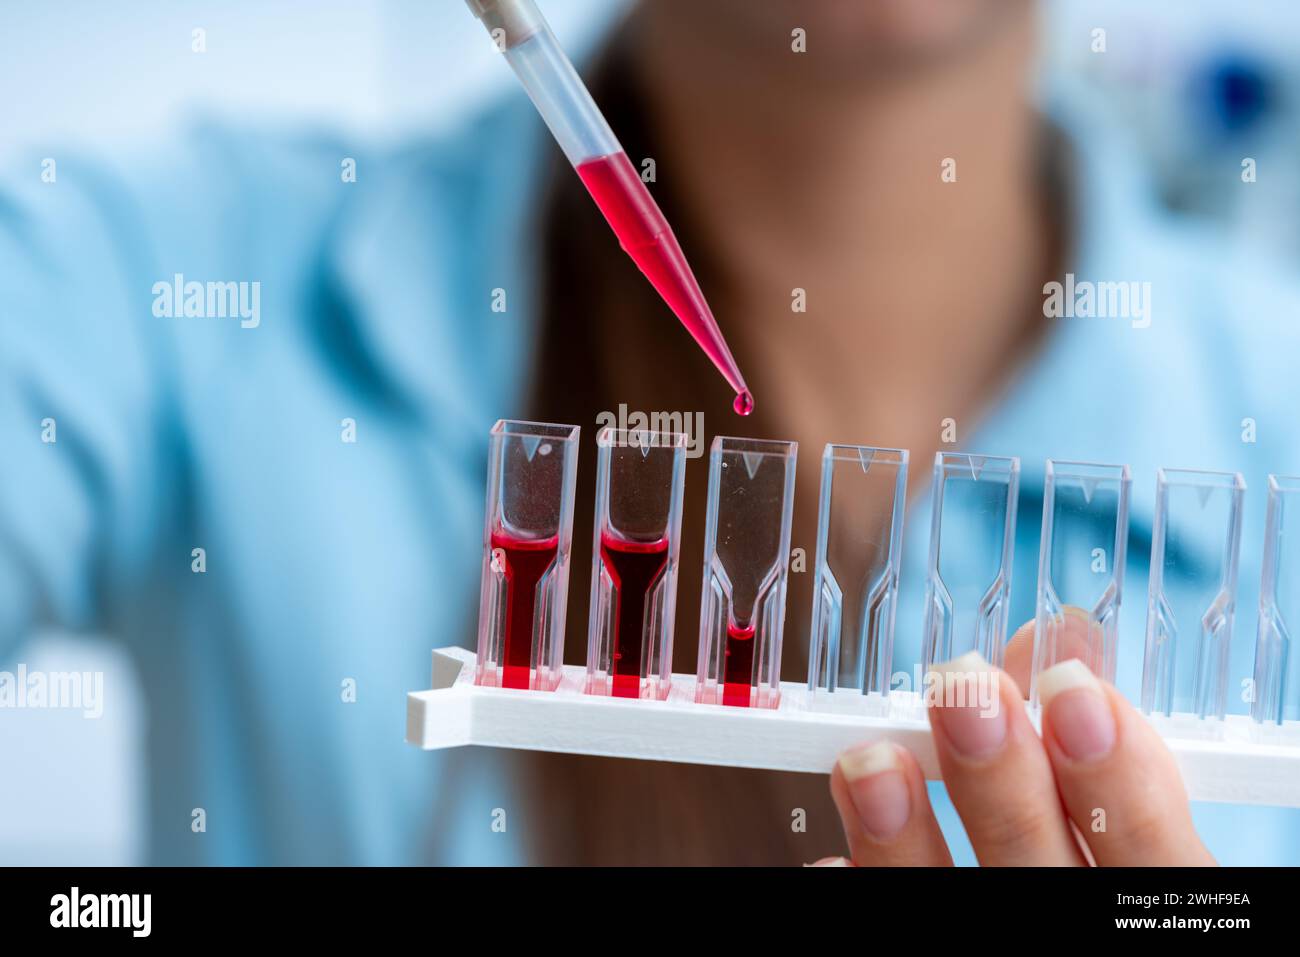 Scientist pipetting into cuvettes Stock Photo